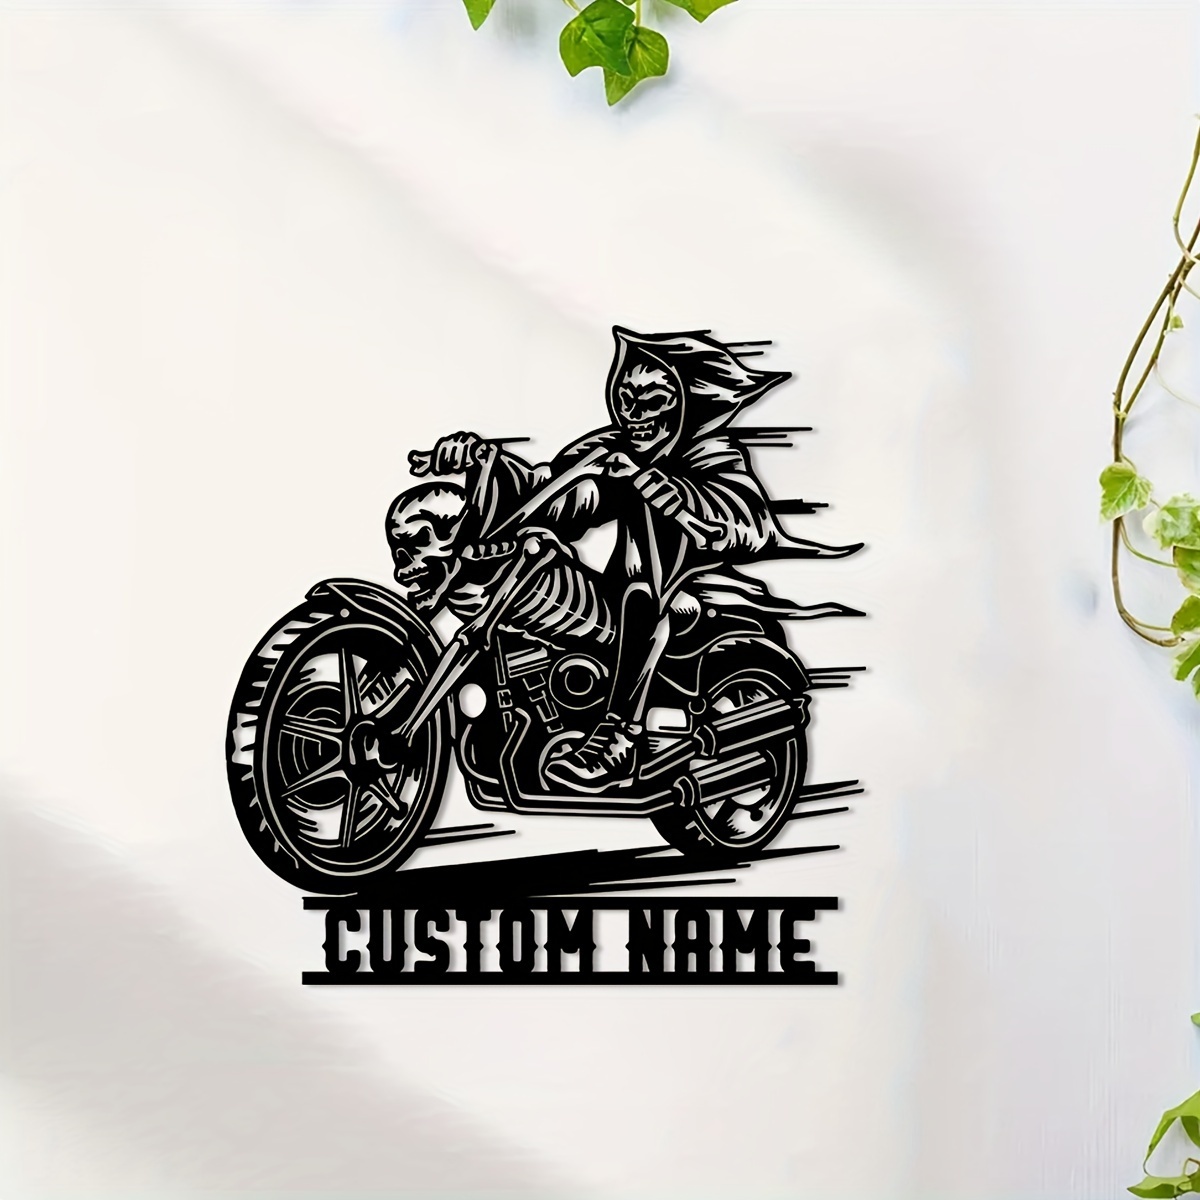 

1pc Custom Motorcycle Wall Art, Personalised Motorcycle Logo, Farmhouse Wall Motorcycle Decor, Metal Art For Living Room Living Room Office Decor, Custom Name Wall Decor For Porch, Patio, Gift